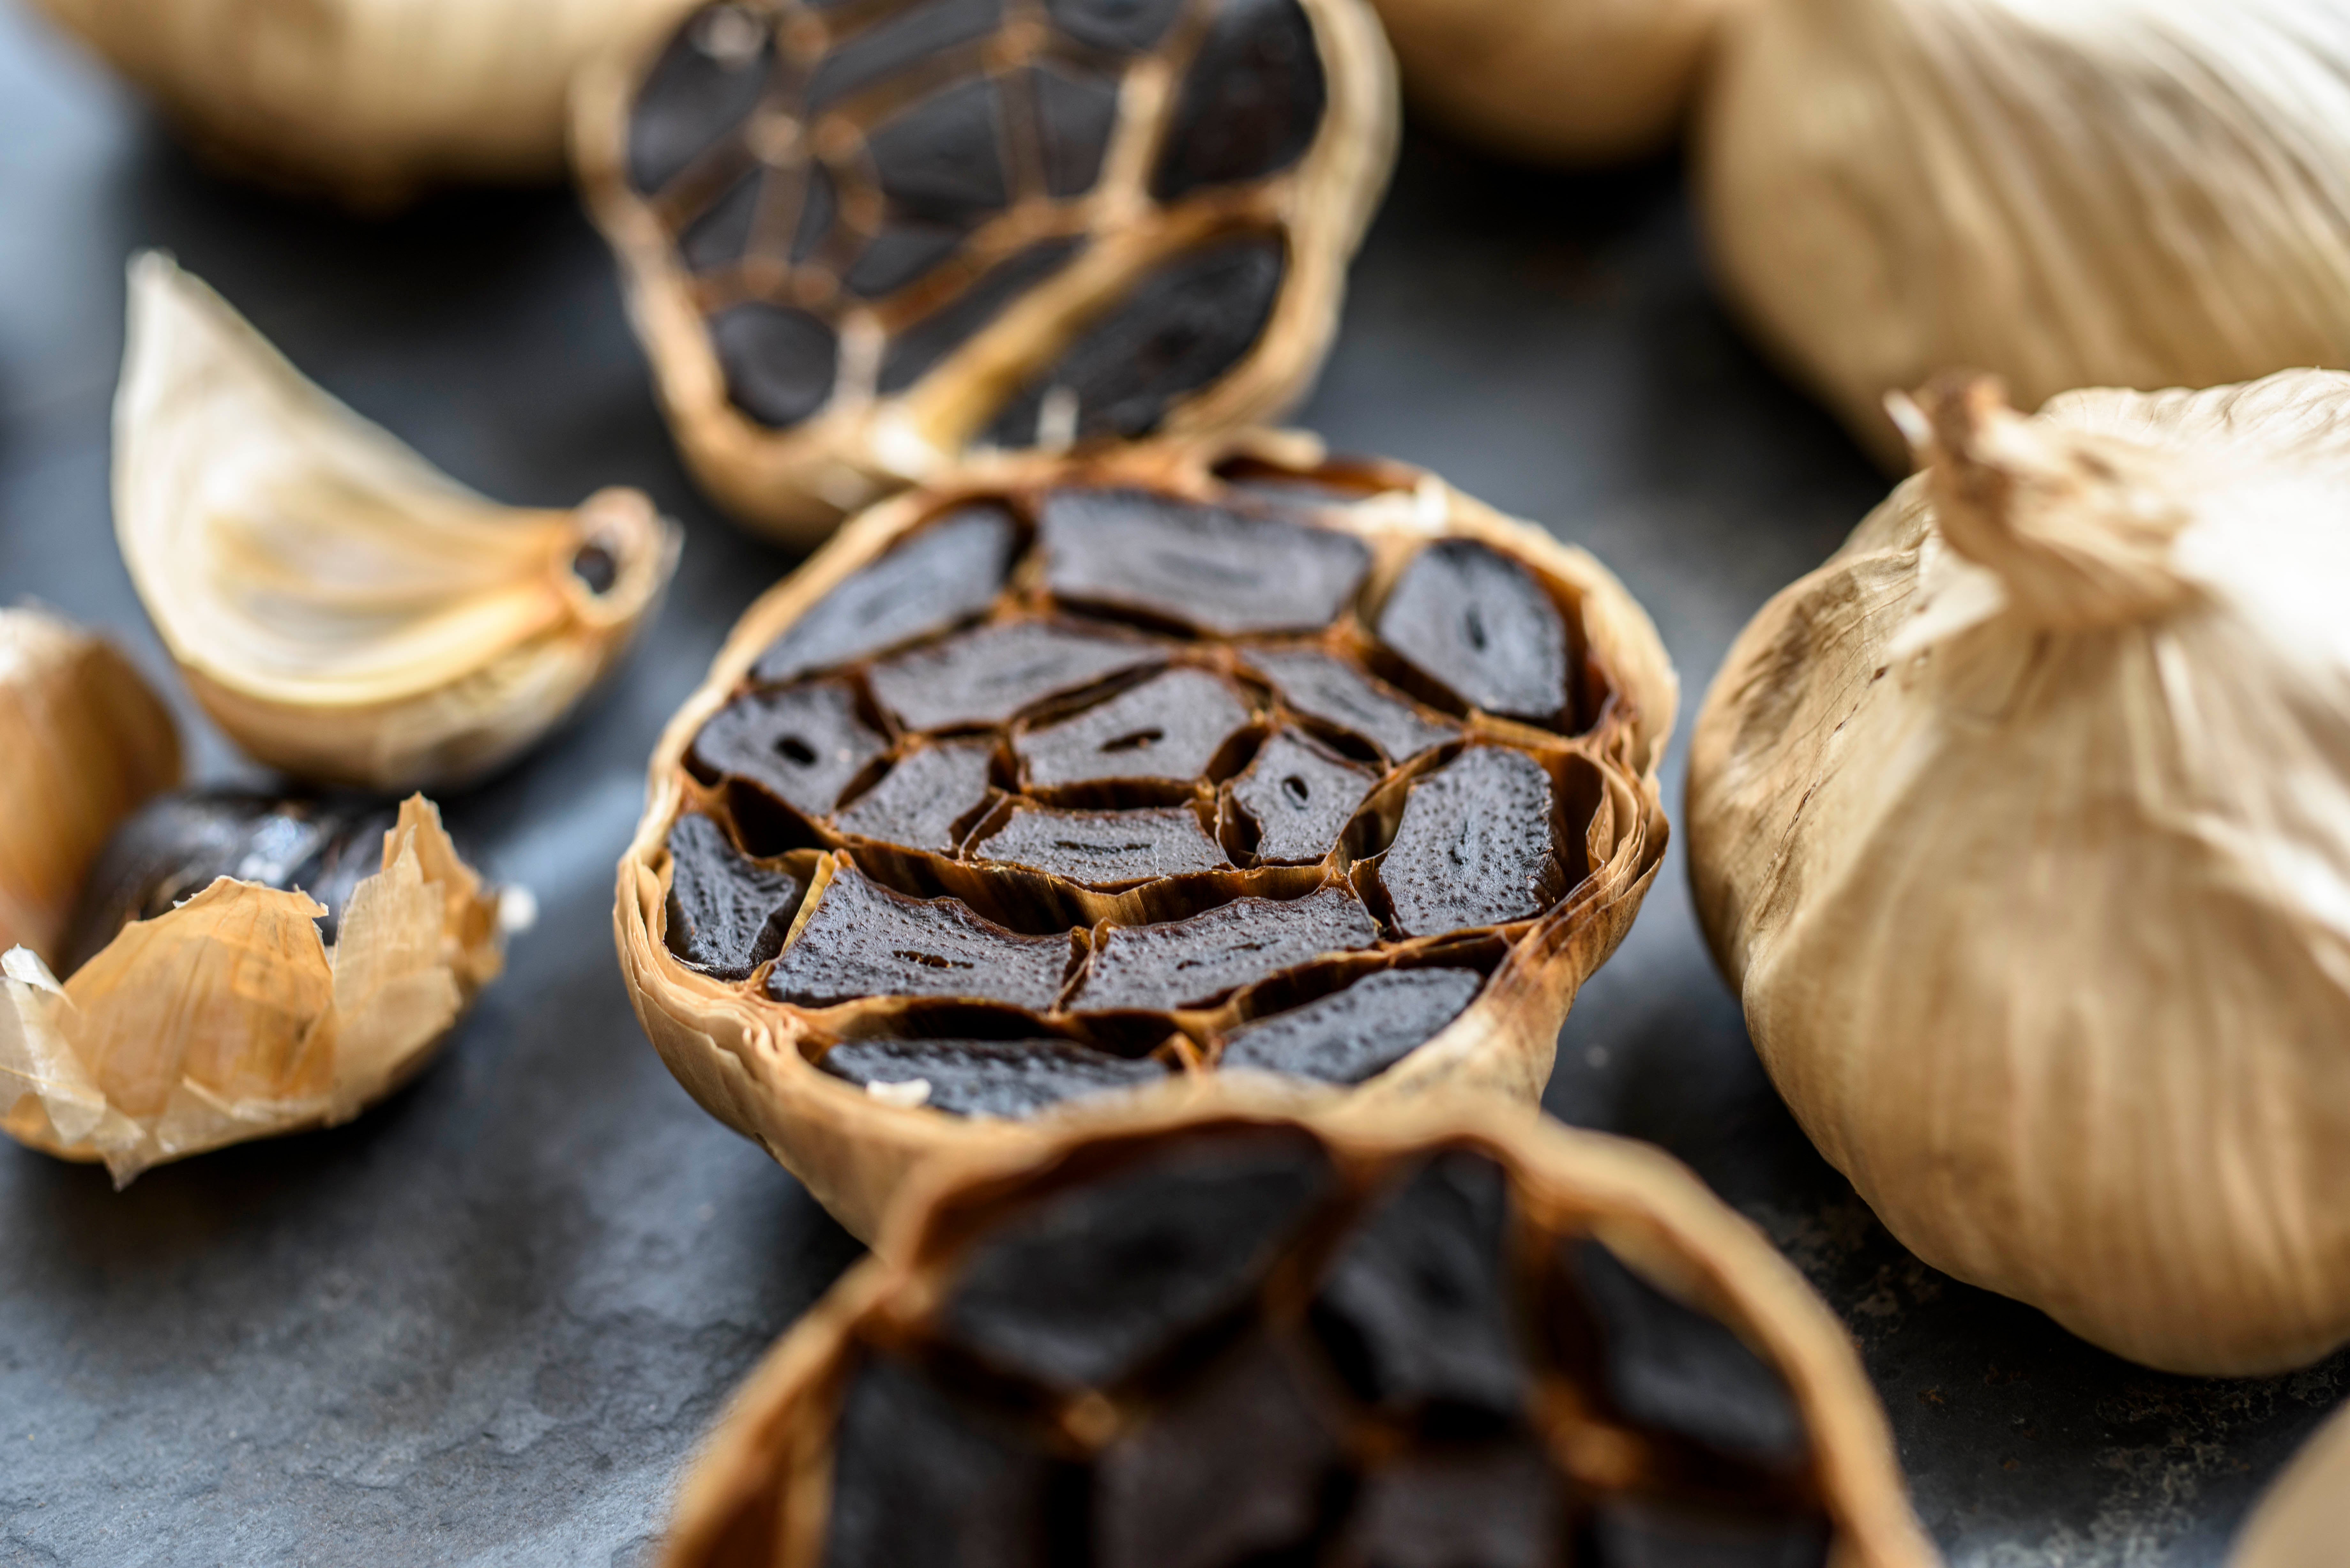 Black garlic is known for its distinctive colour and taste